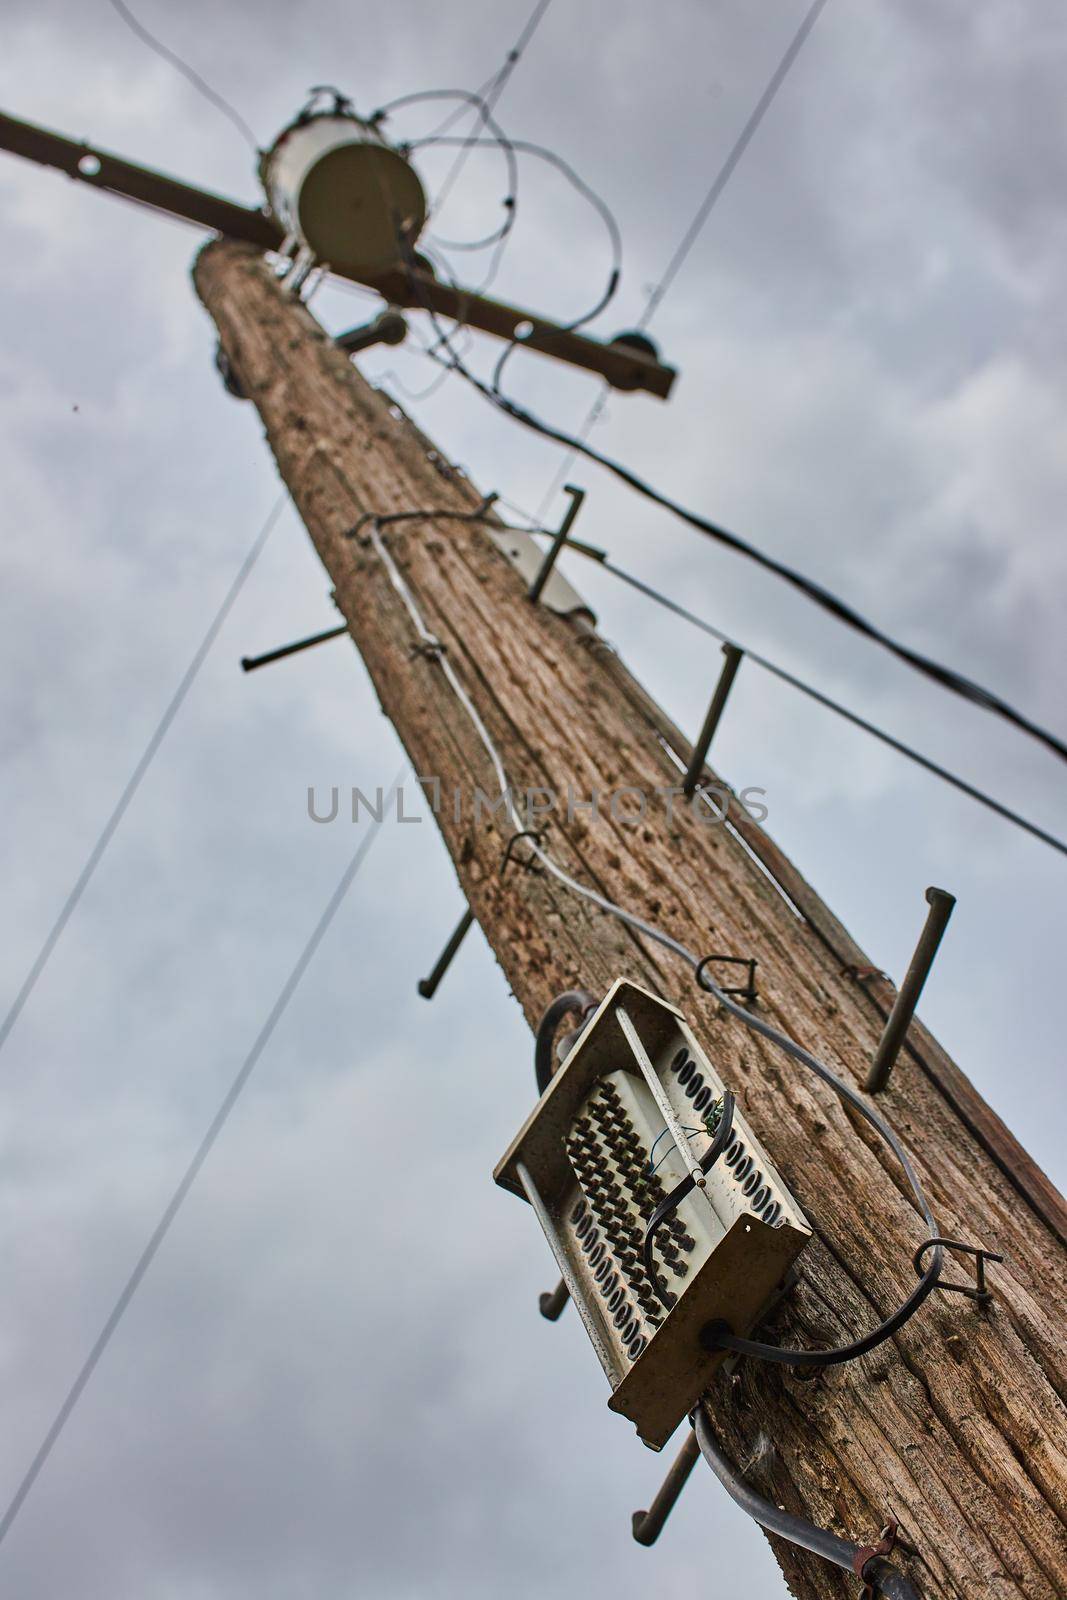 Image of Telephone pole looking up detail on cloudy day for communication and power